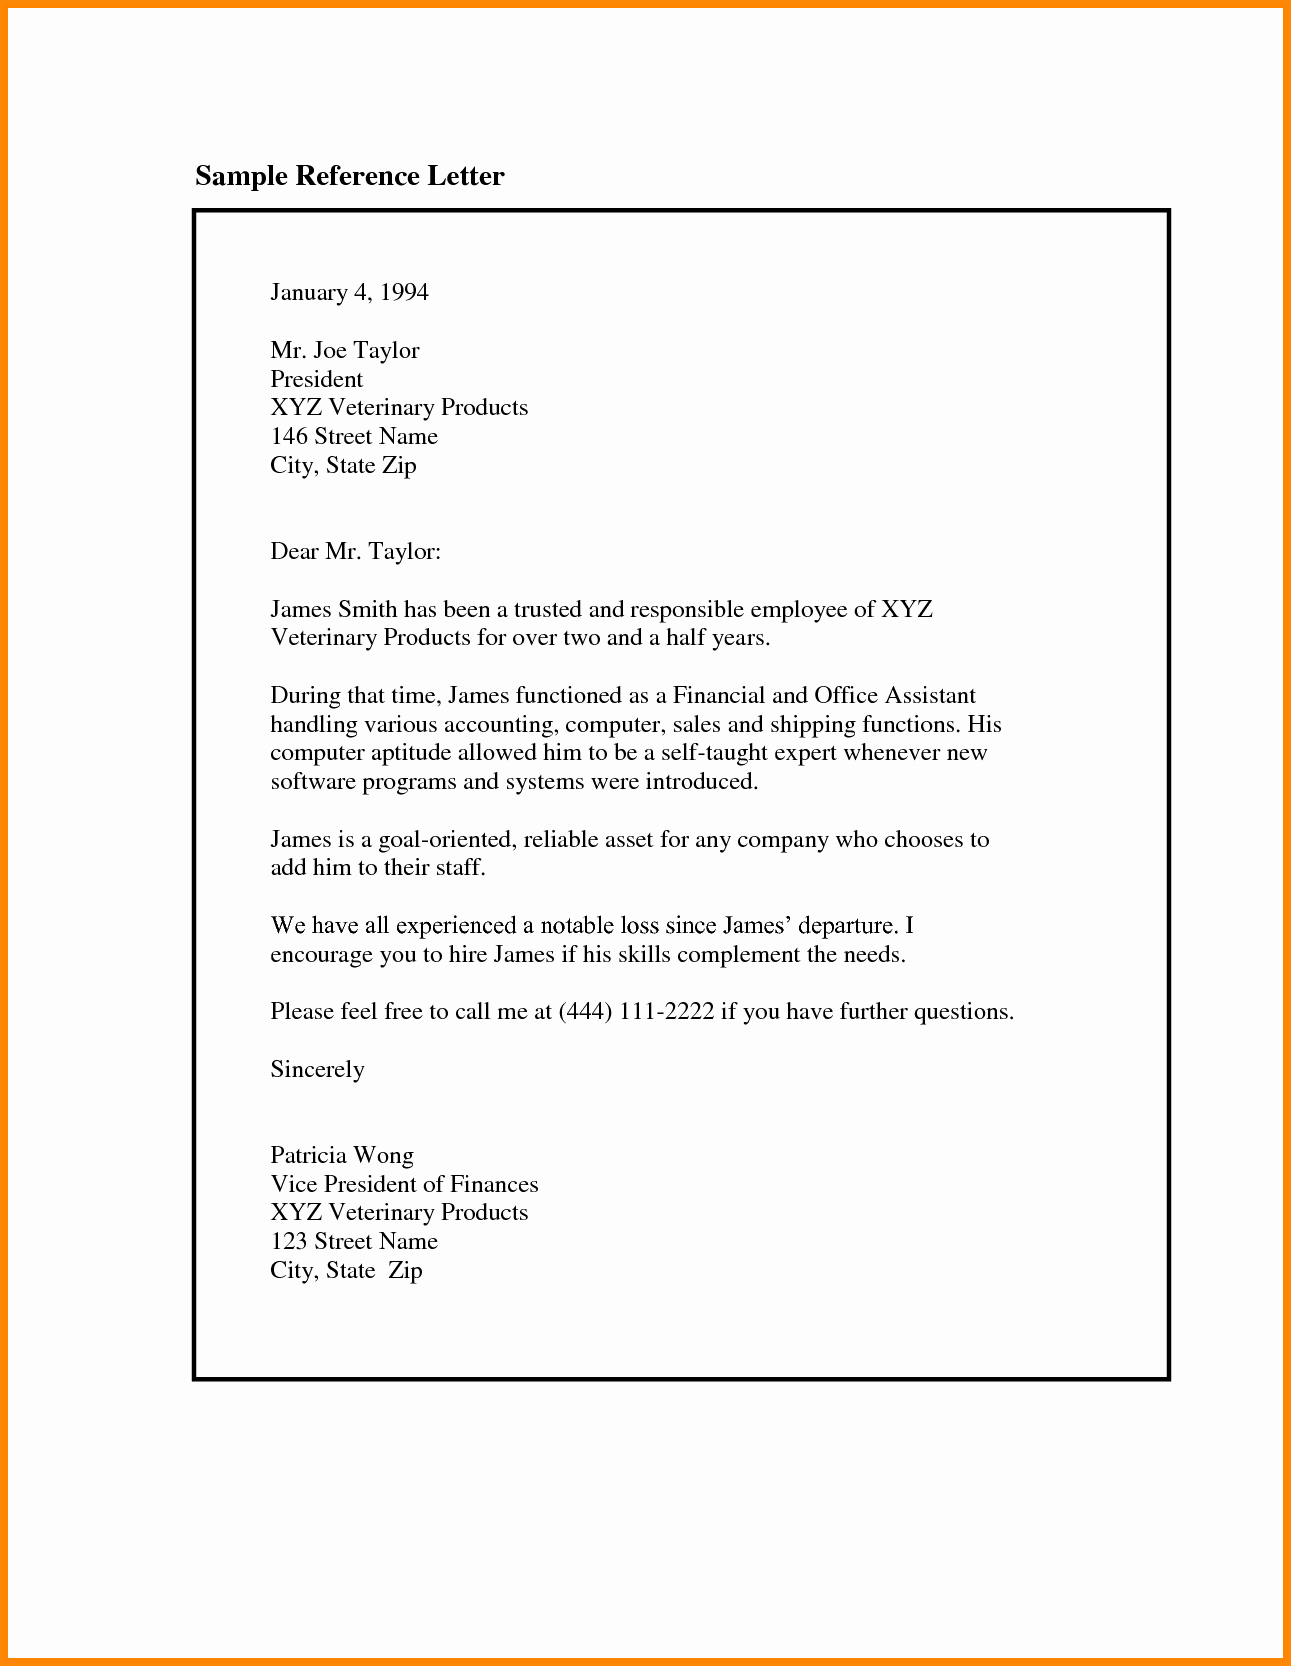 Letters Of Reference for Employees Fresh Writing A Reference Letter for An Employee